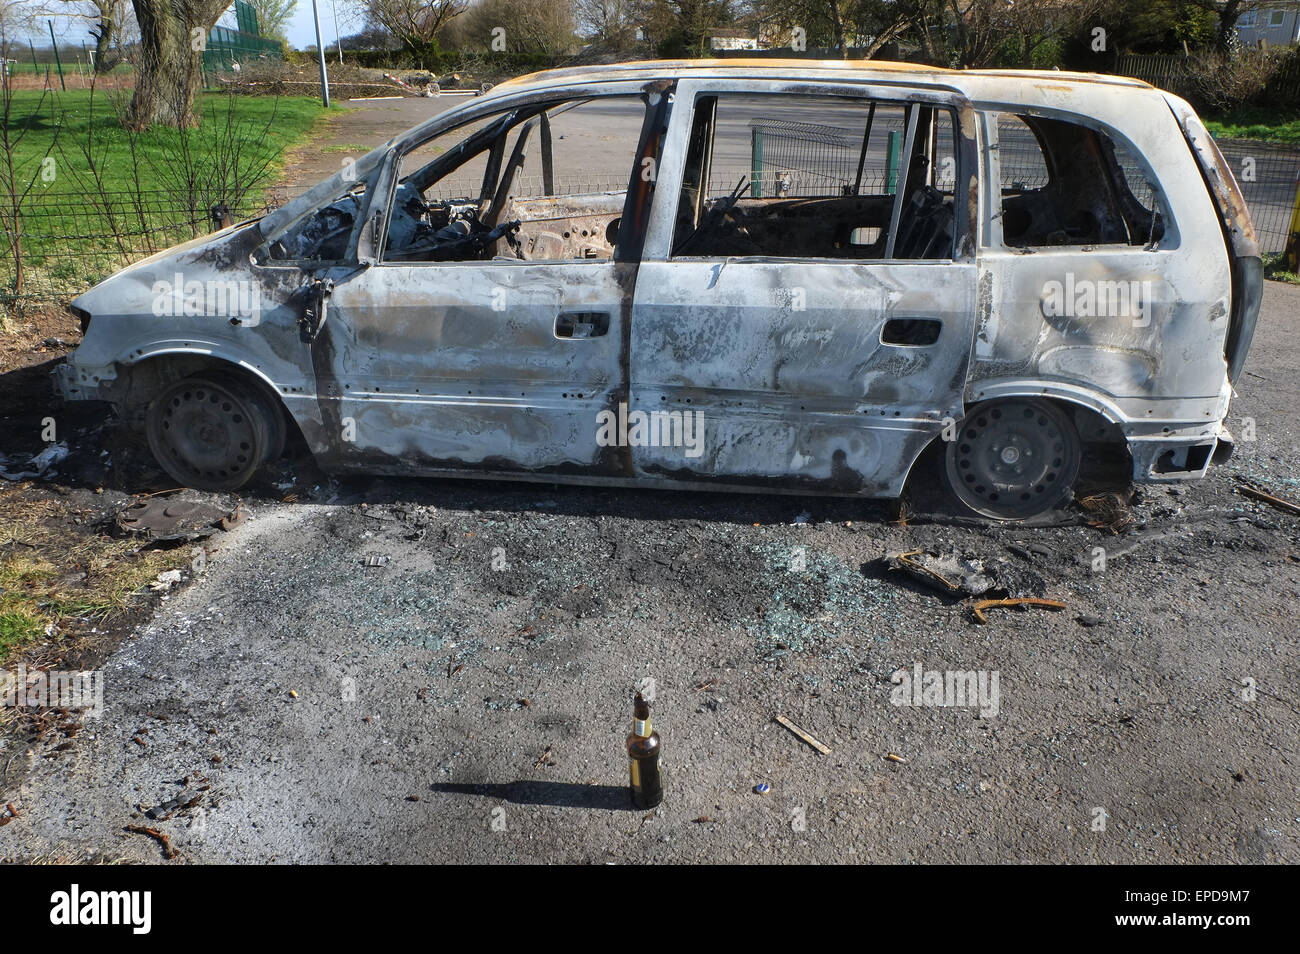 Burnt out car after being stolen. Stock Photo